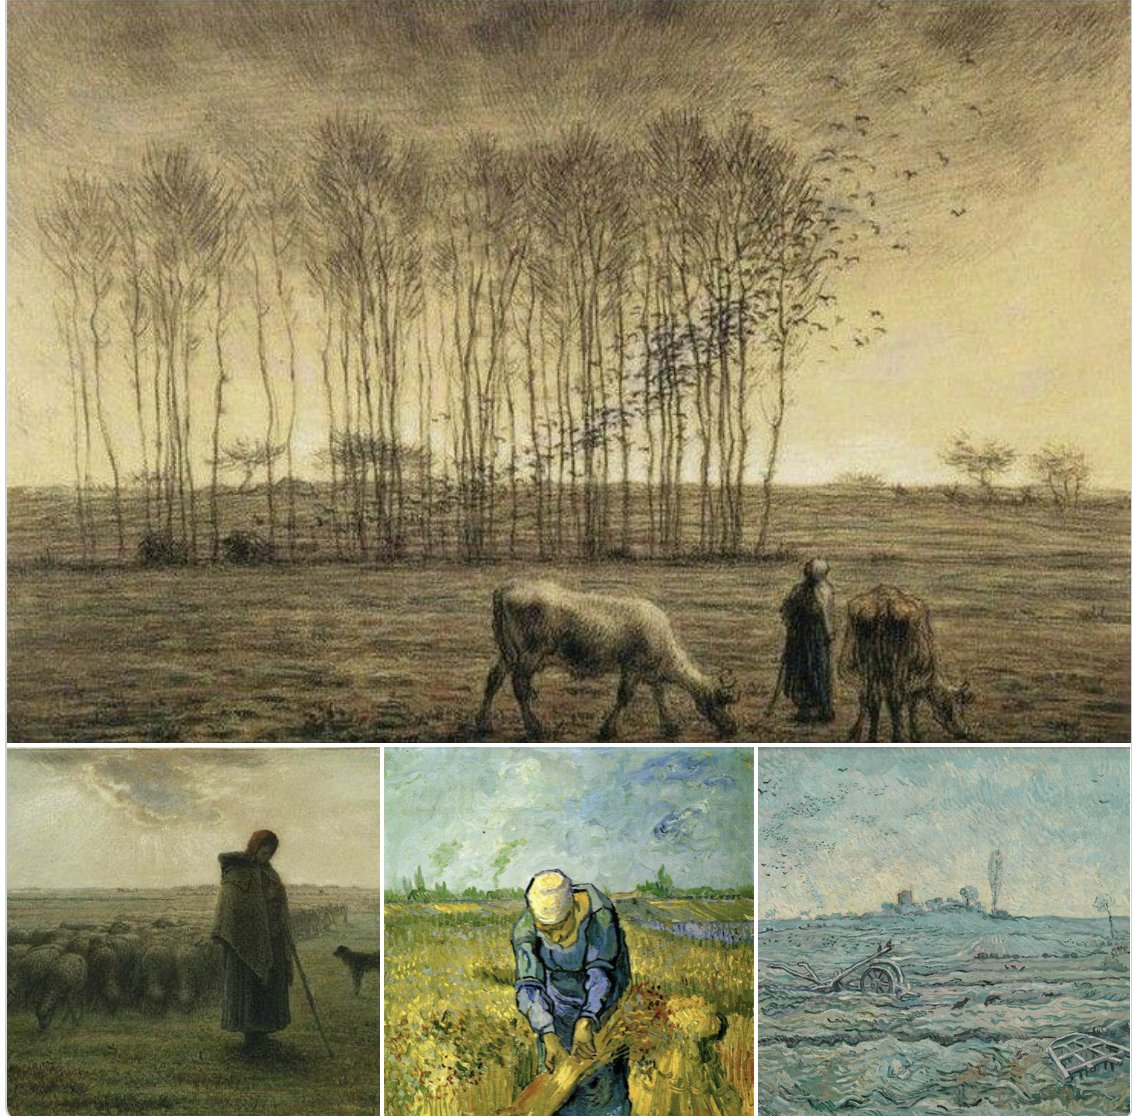 The French Barbazon painter #Millet was a great inspiration to #VanGogh who often 'translated' a Millet etching into a full-color painting. Millet strove for a sacred art in which humble peasants were portrayed as heroically engaged with nature.